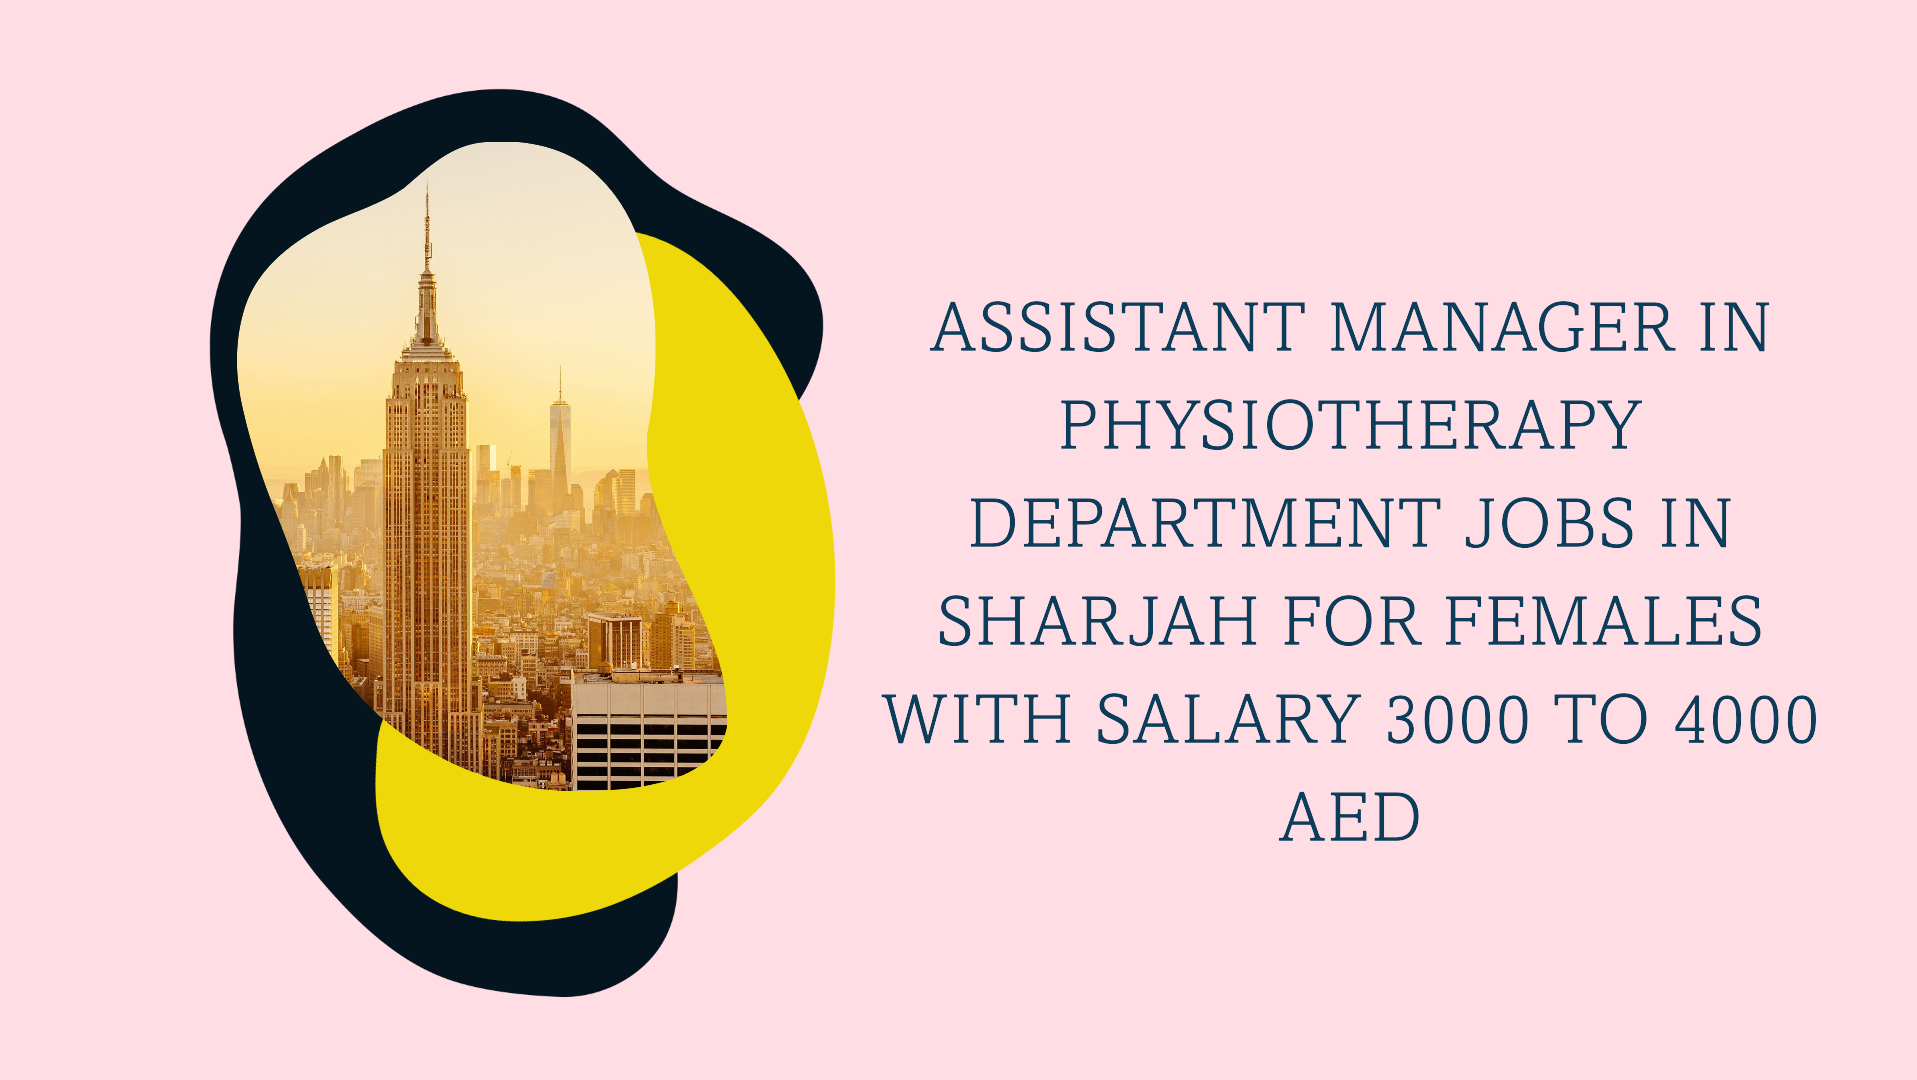 Assistant Manager in Physiotherapy Department jobs in Sharjah for females with salary 3000 to 4000 AED